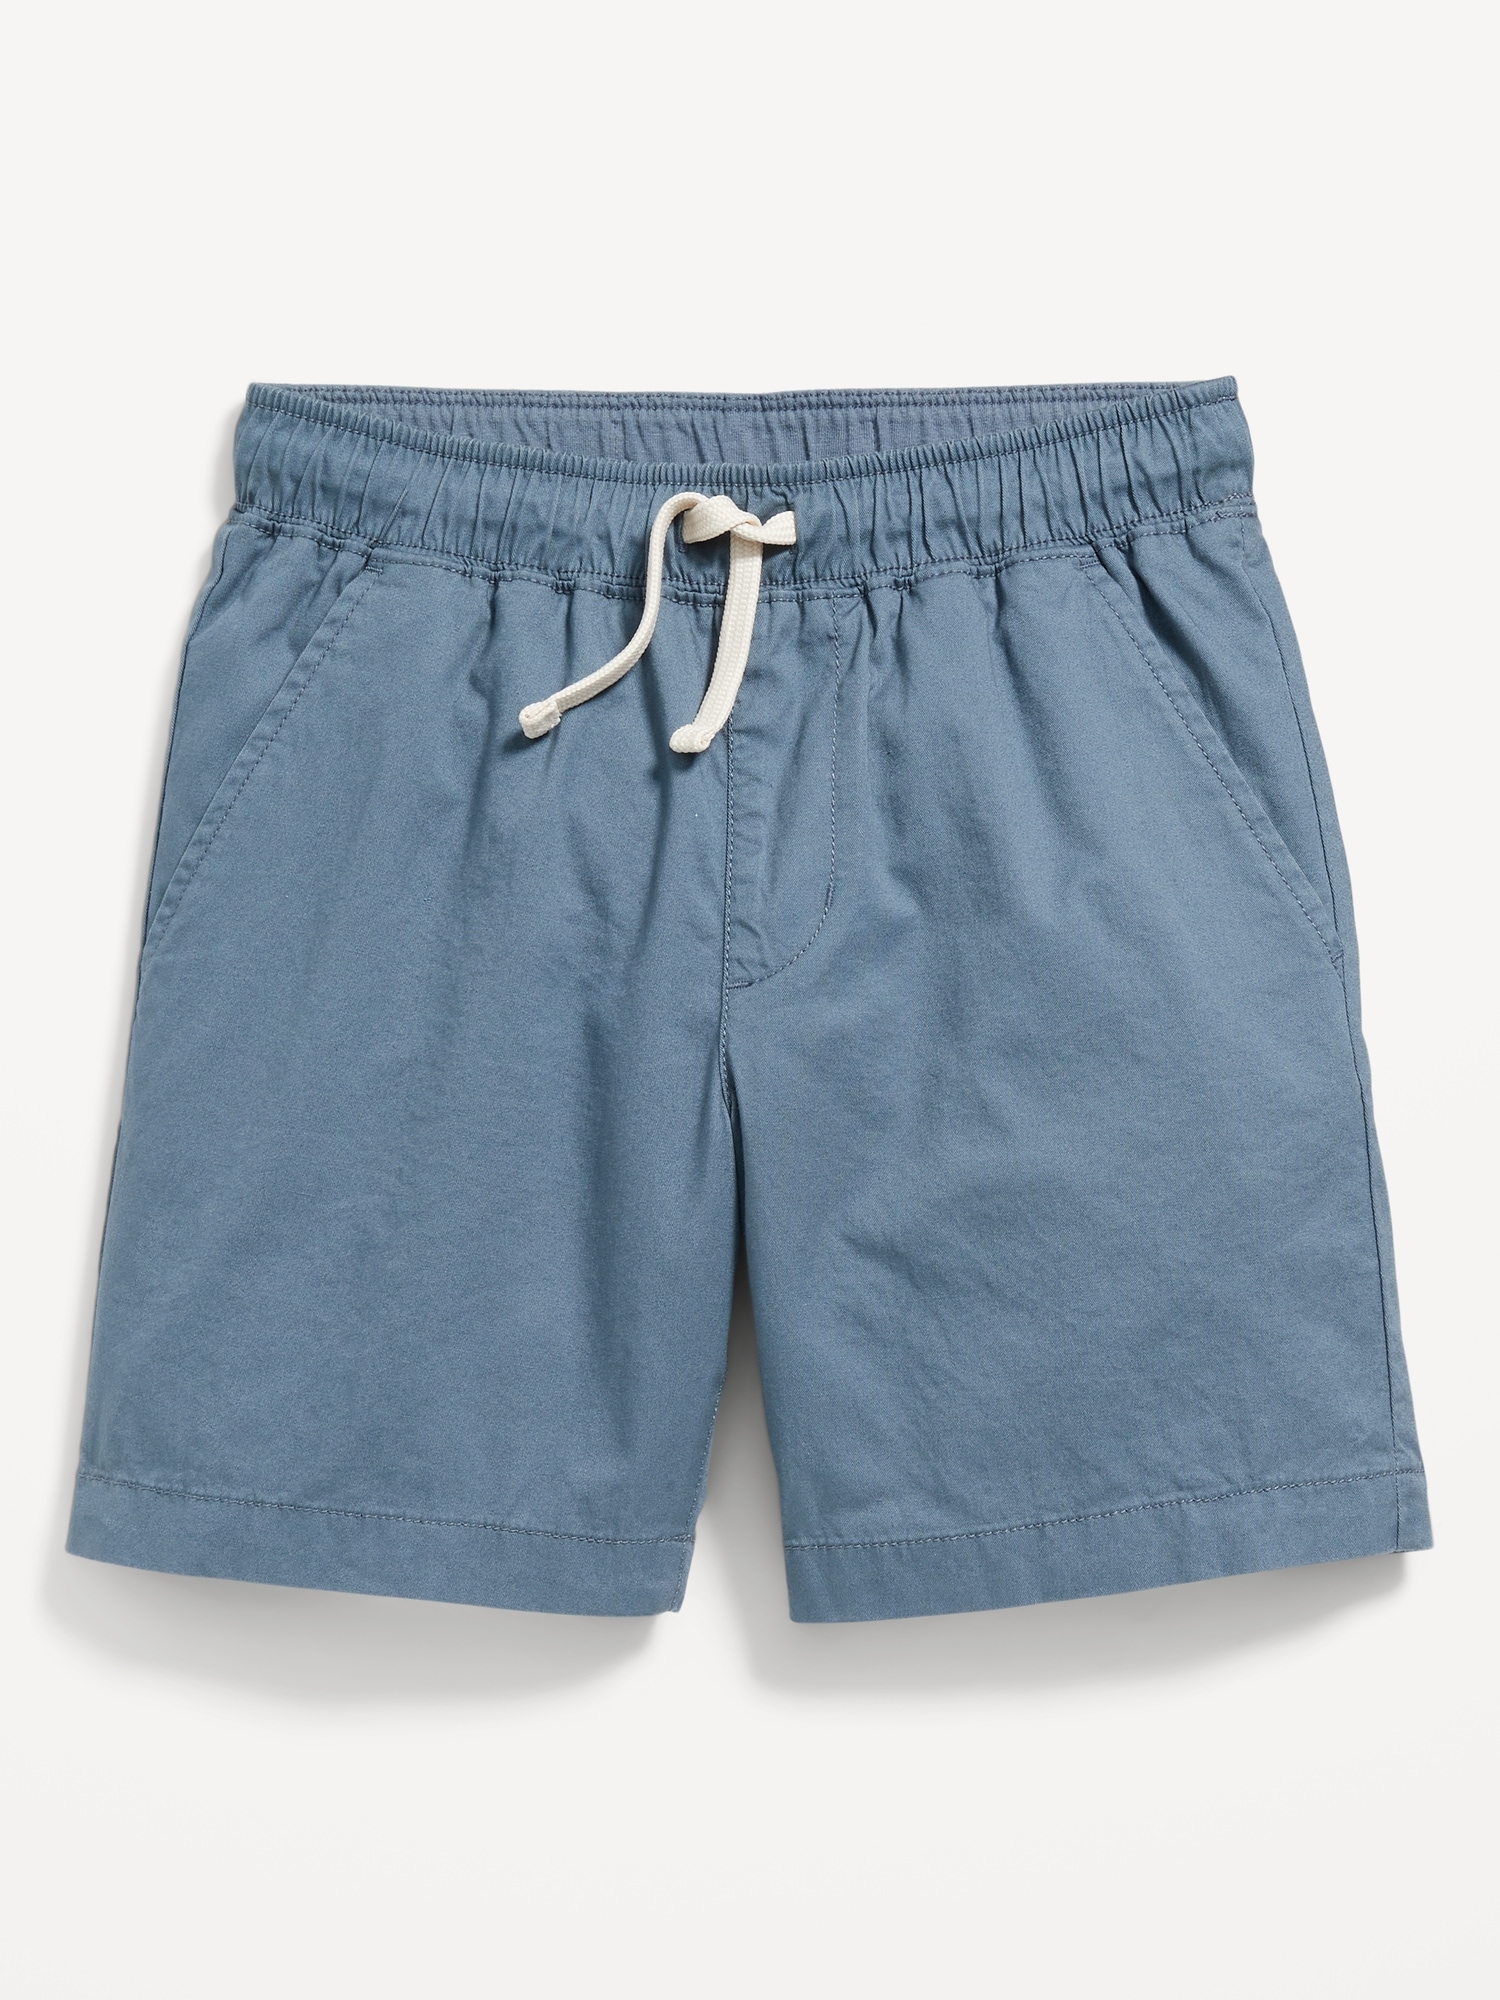 Twill Non-Stretch Jogger Shorts for Boys (Above Knee) | Old Navy